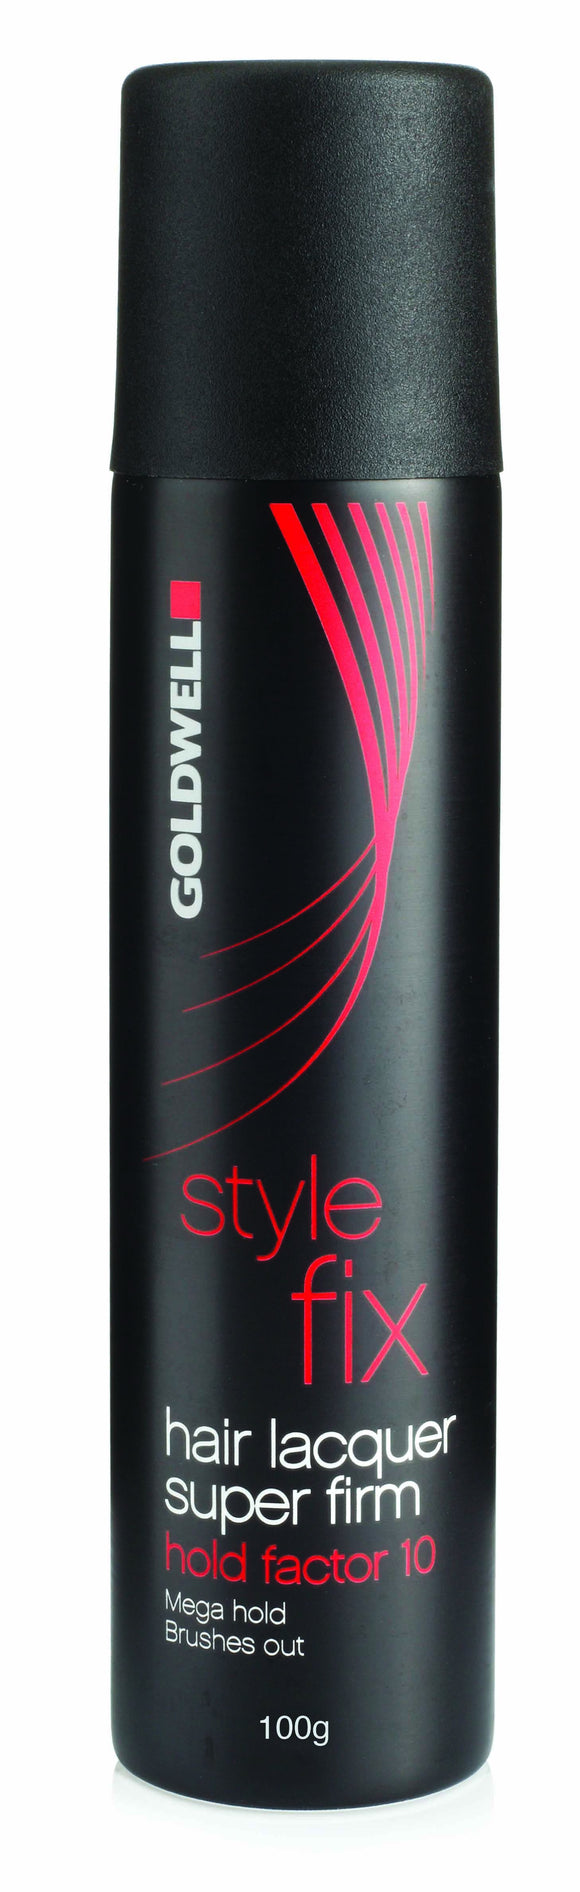 Goldwell Style Fix Hair Lacquer Super Firm Hold Factor 10 - 100g